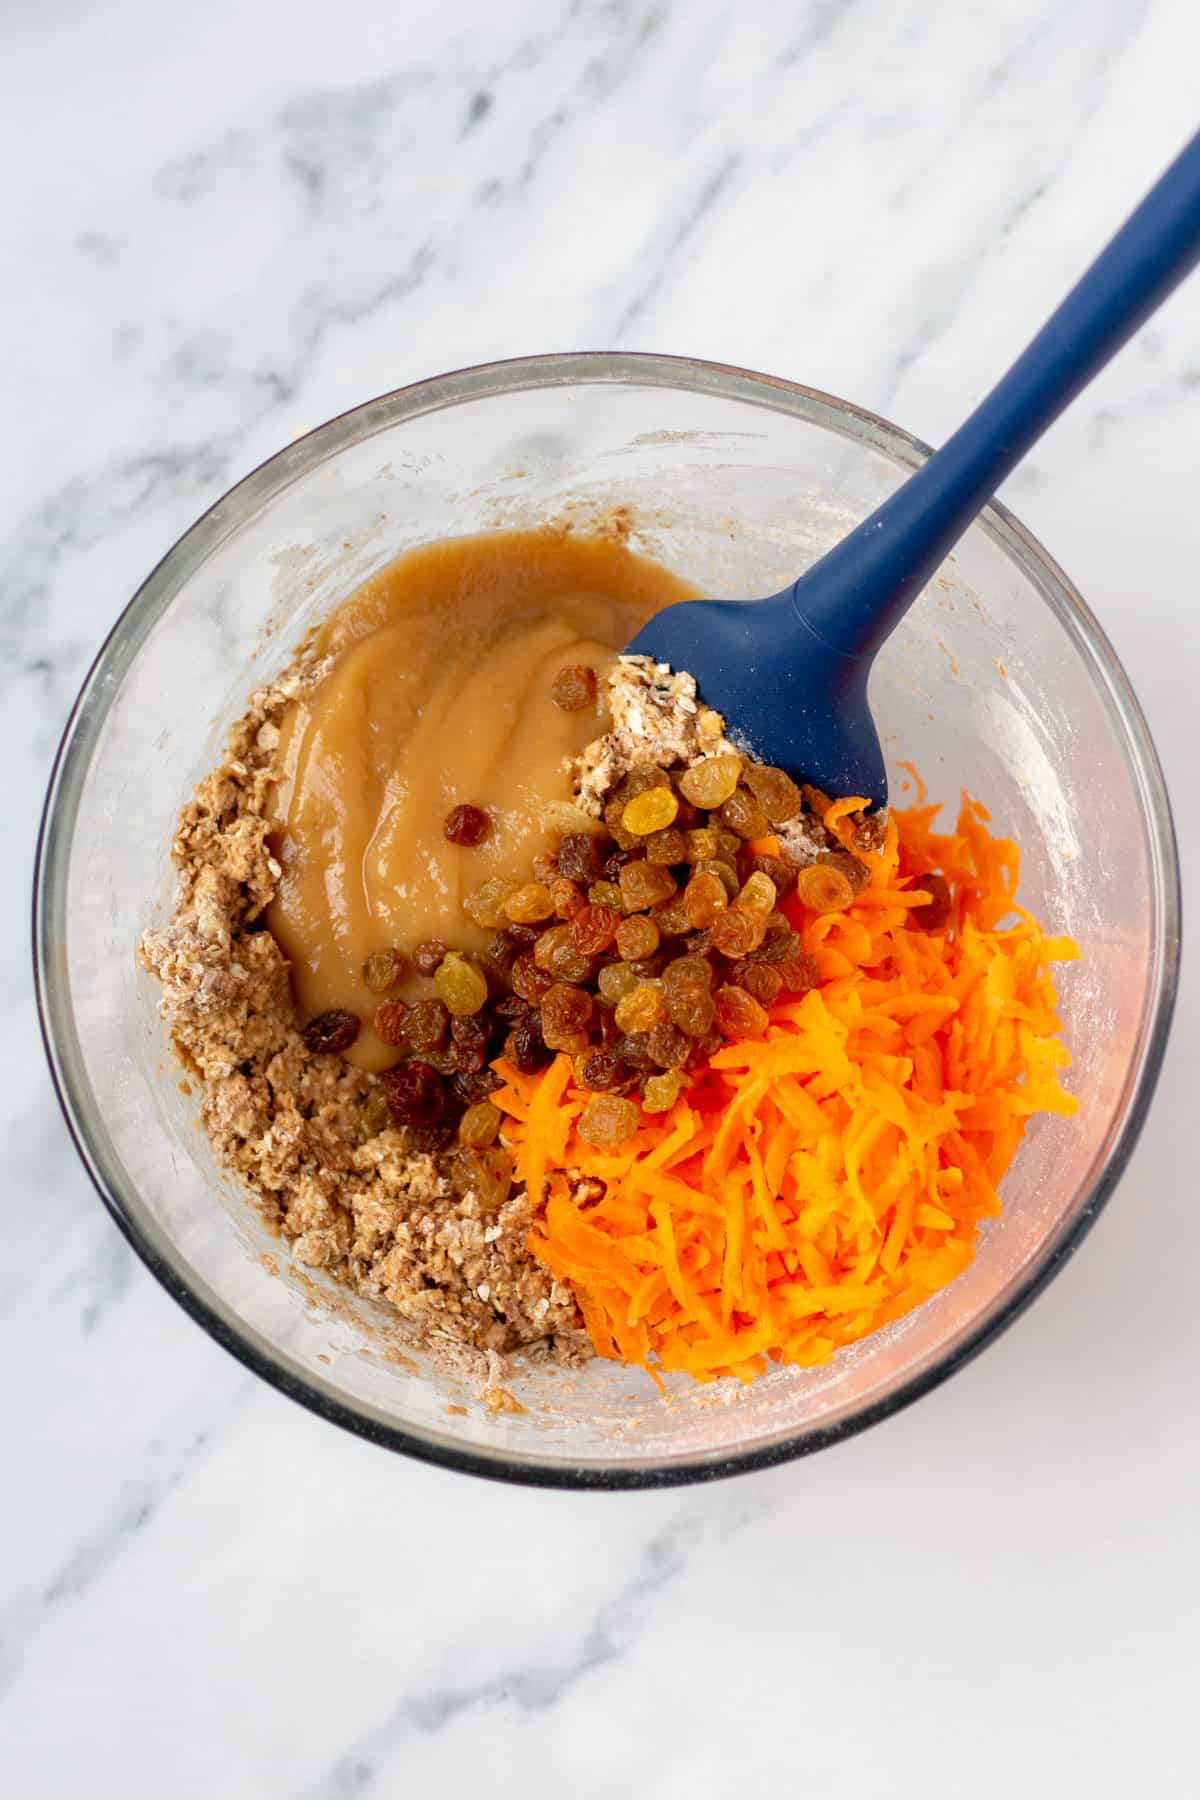 carrots and raisins added to muffin batter in a mixing bowl